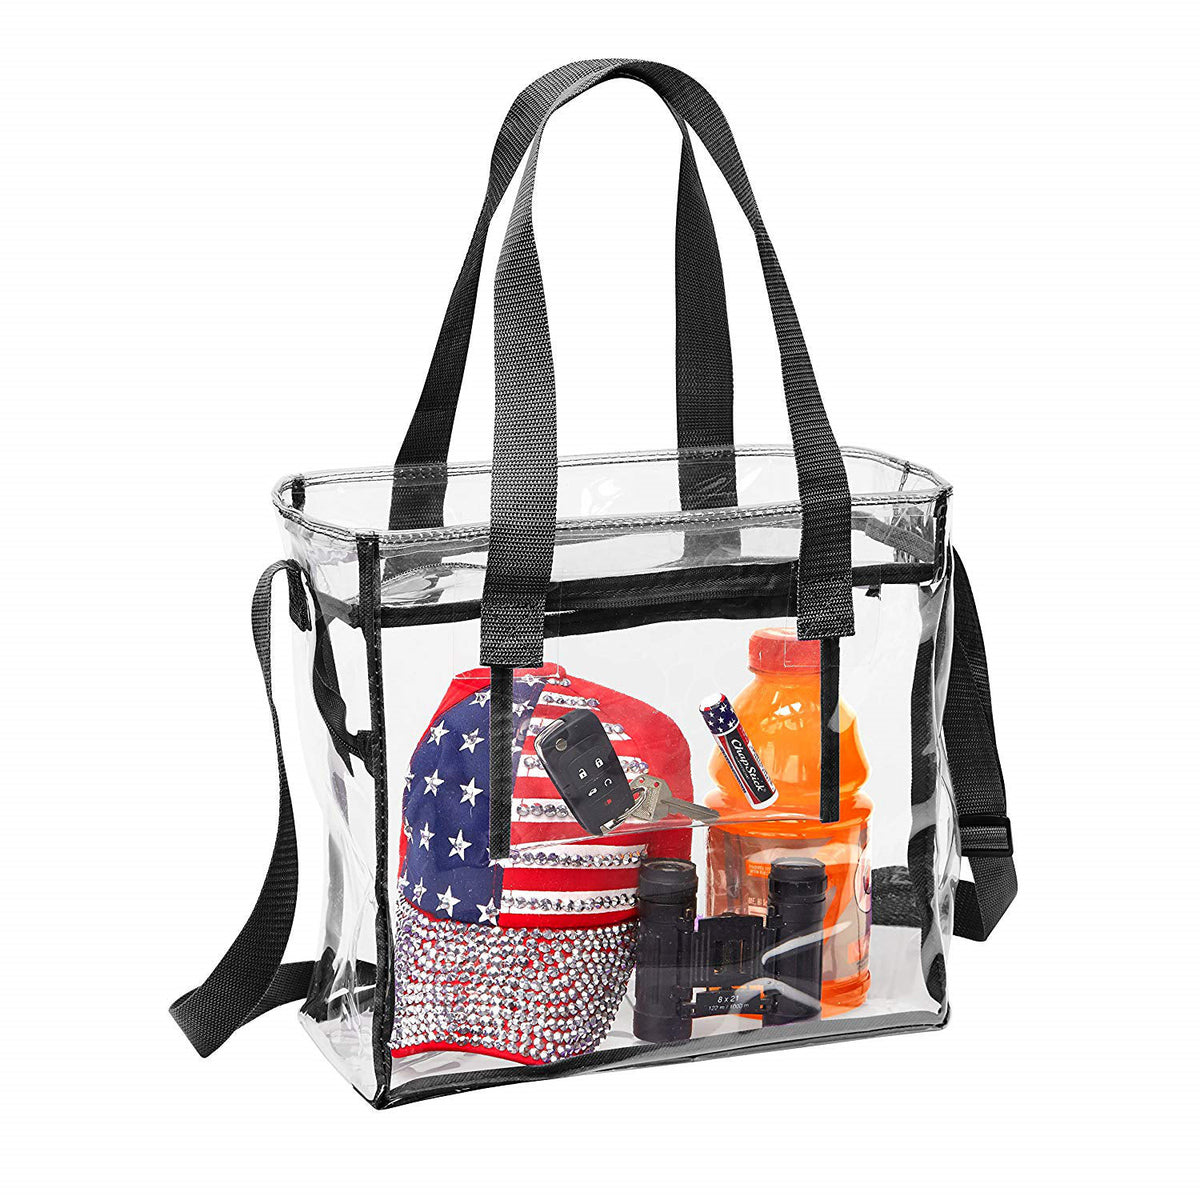 Custom Clear Tote Bags - Stadium Approved Clear Bags